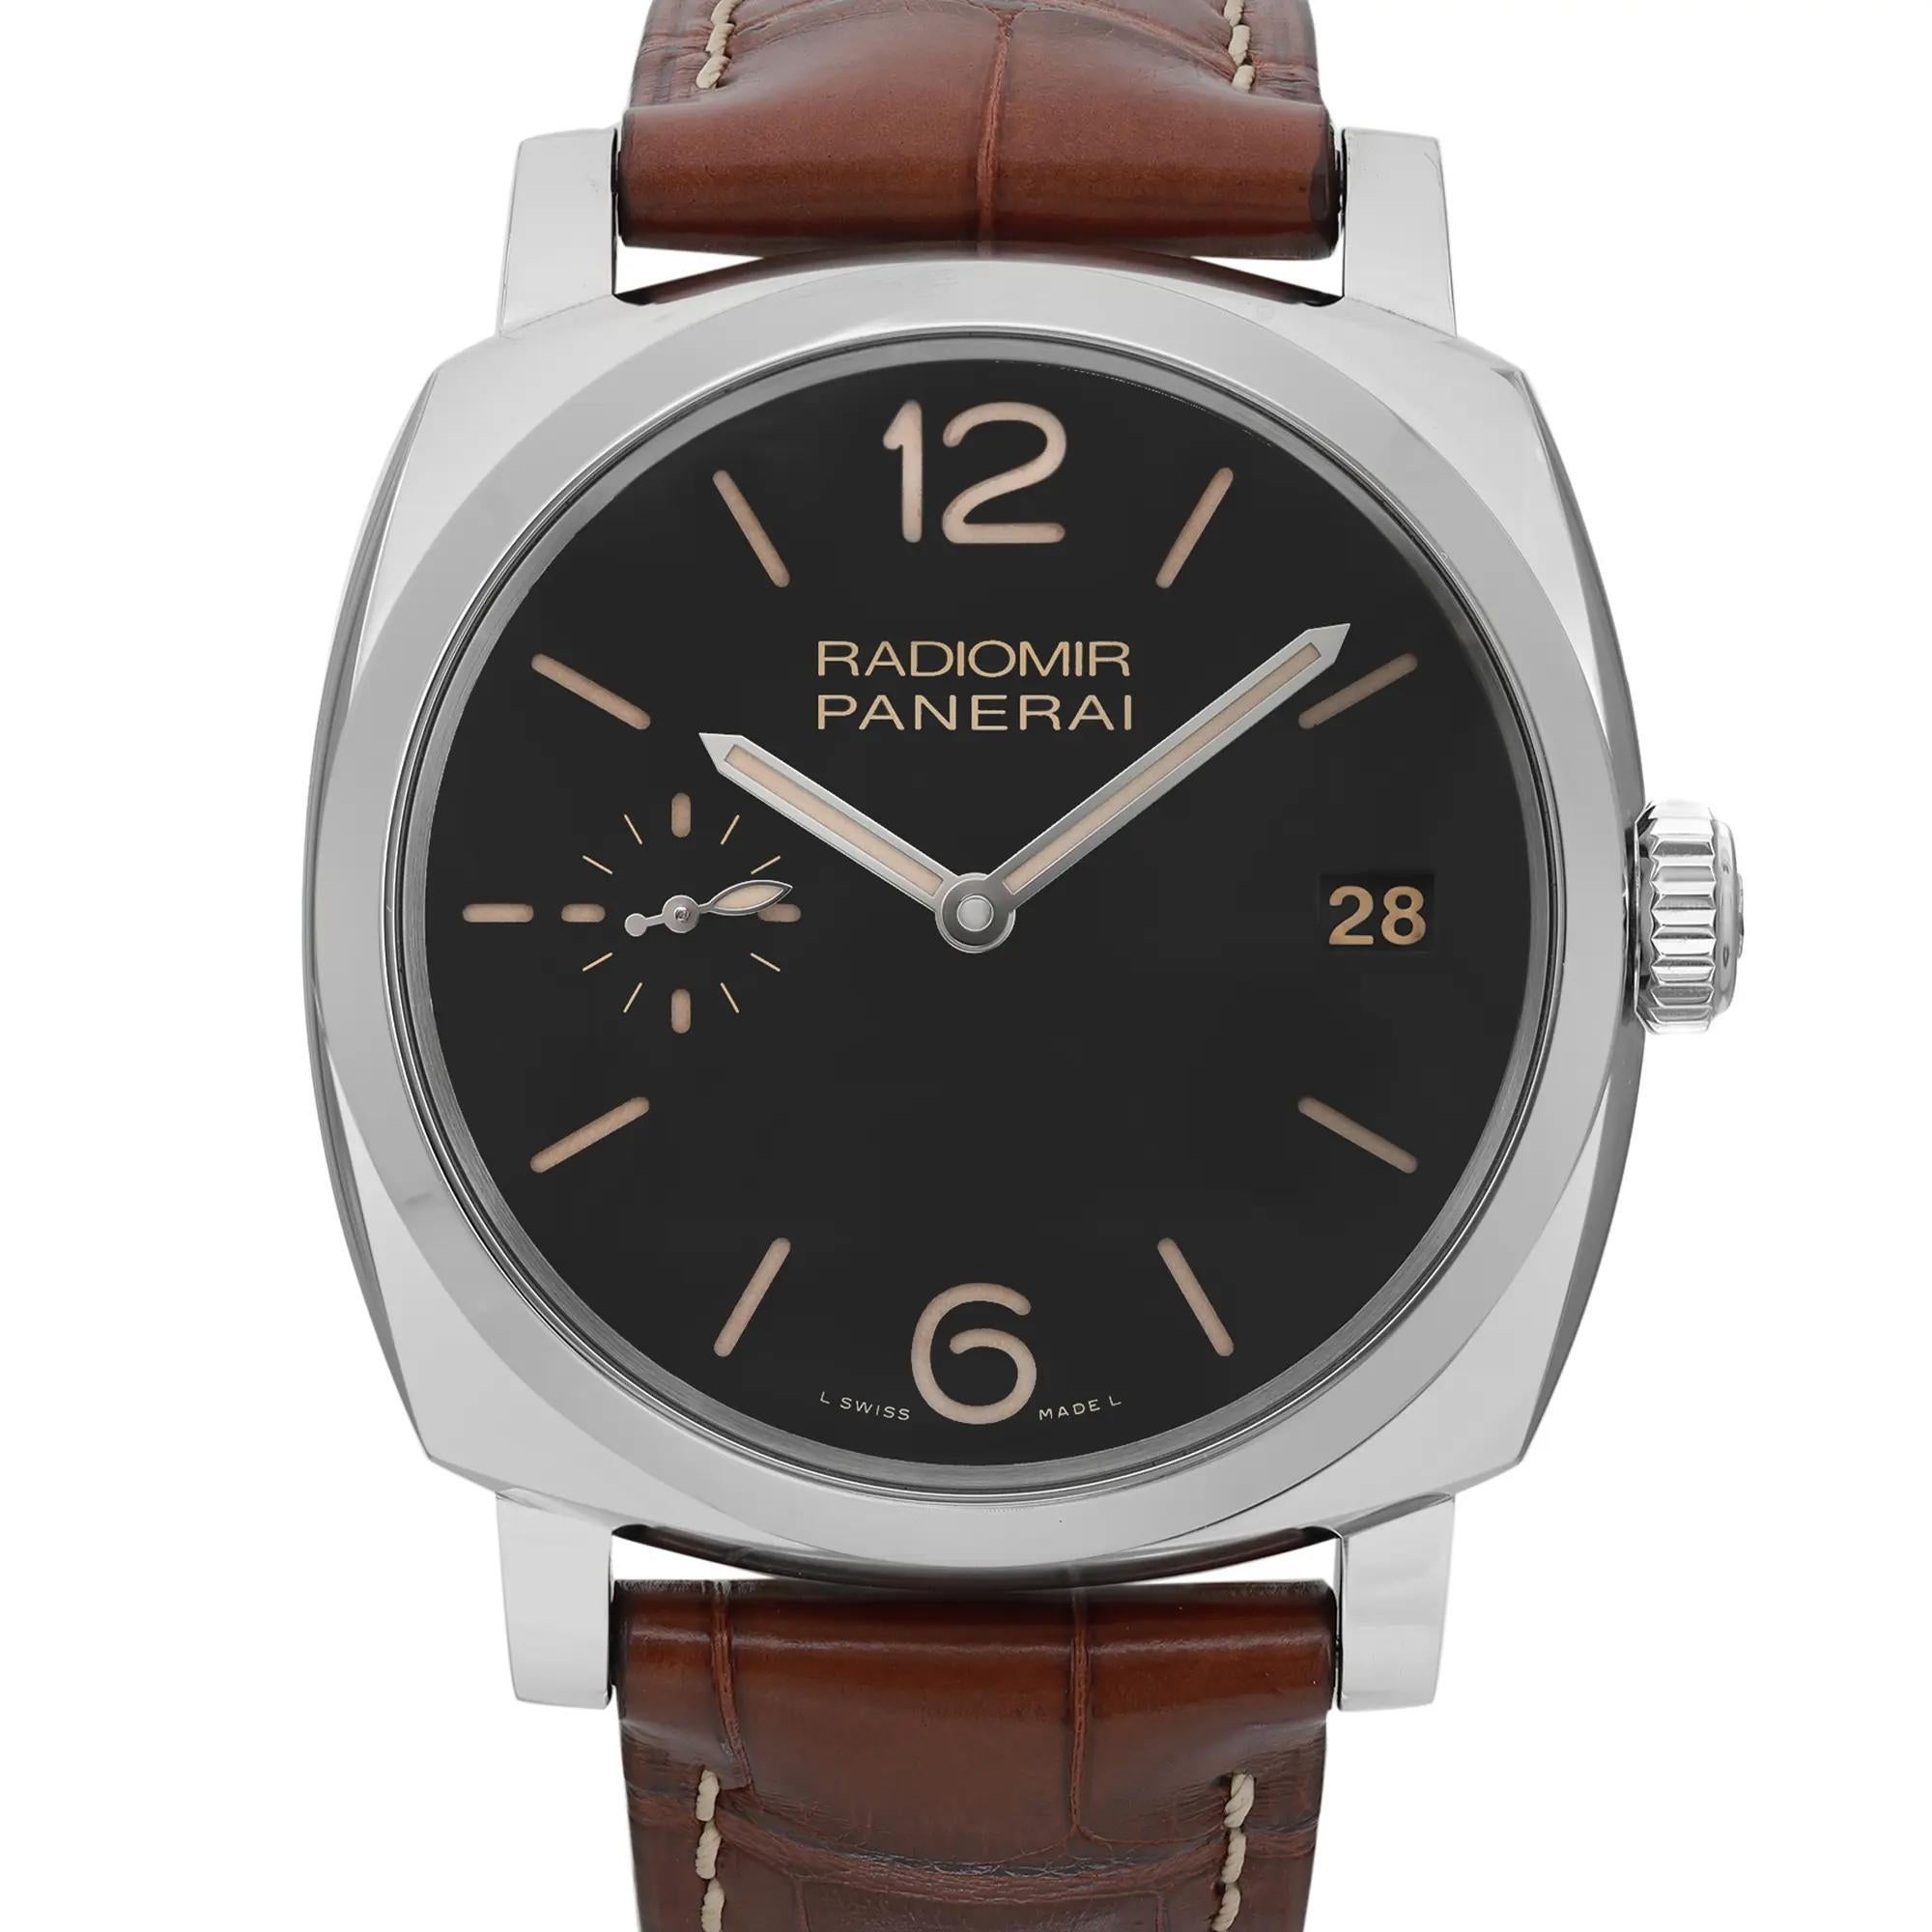 Unworn. Comes with the original box and papers.

Brand & Model Information:
Brand: Panerai
Model: Panerai Radiomir
Model Number: PAM00514

Specifications:
Type: Wristwatch
Department: Men
Movement: Mechanical (Manual), Calibre P.3000, 21 Jewels
Dial